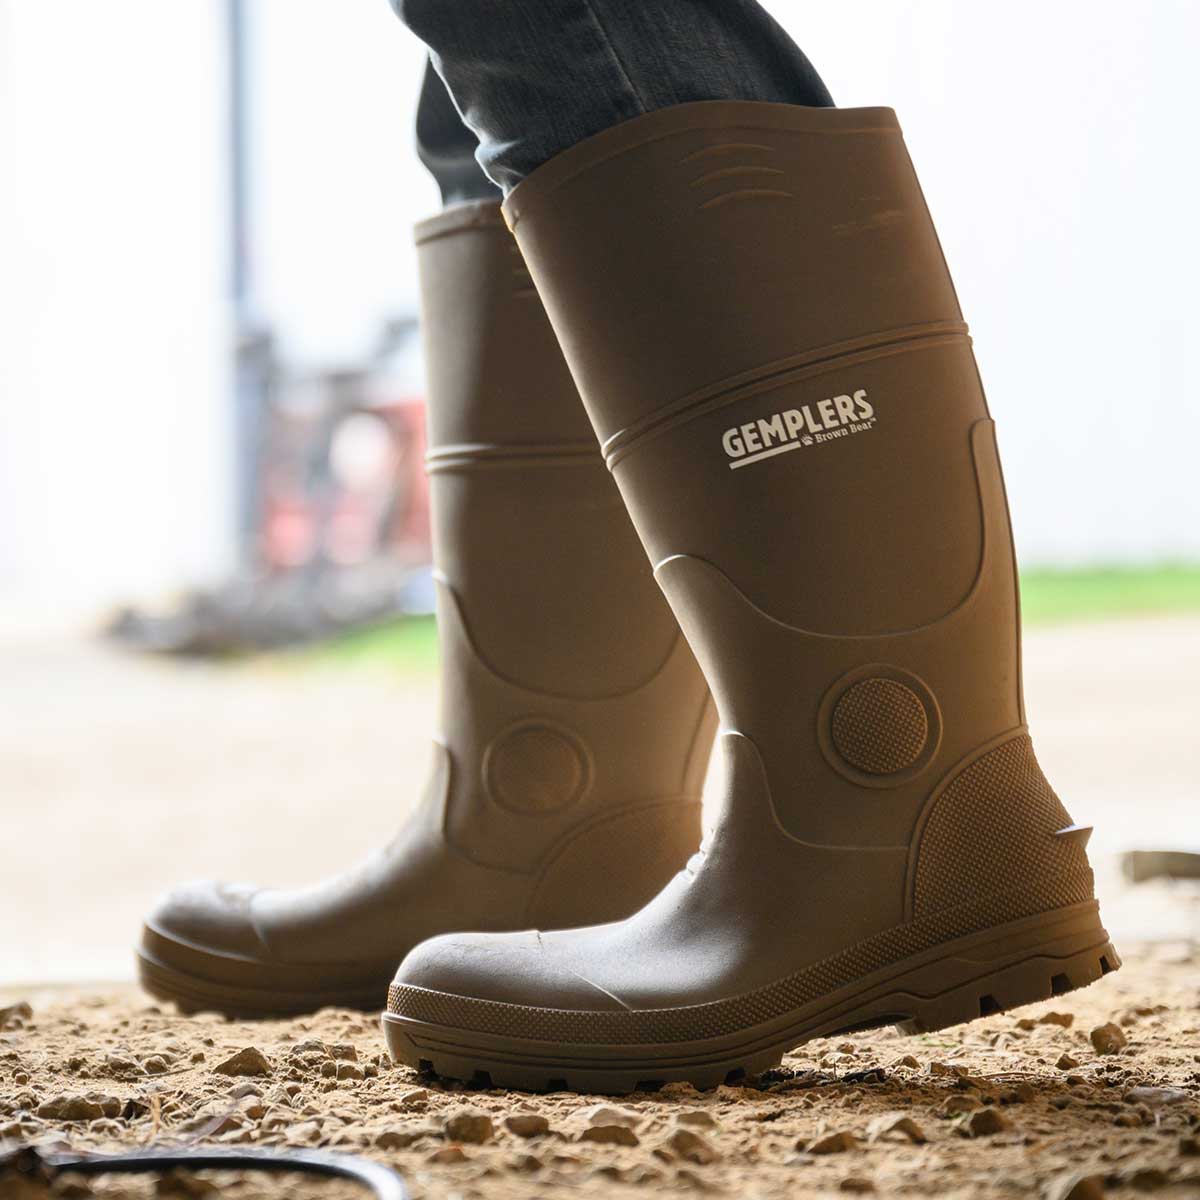 Gemplers Brown Bear Chemical-Resistant Chore Boots